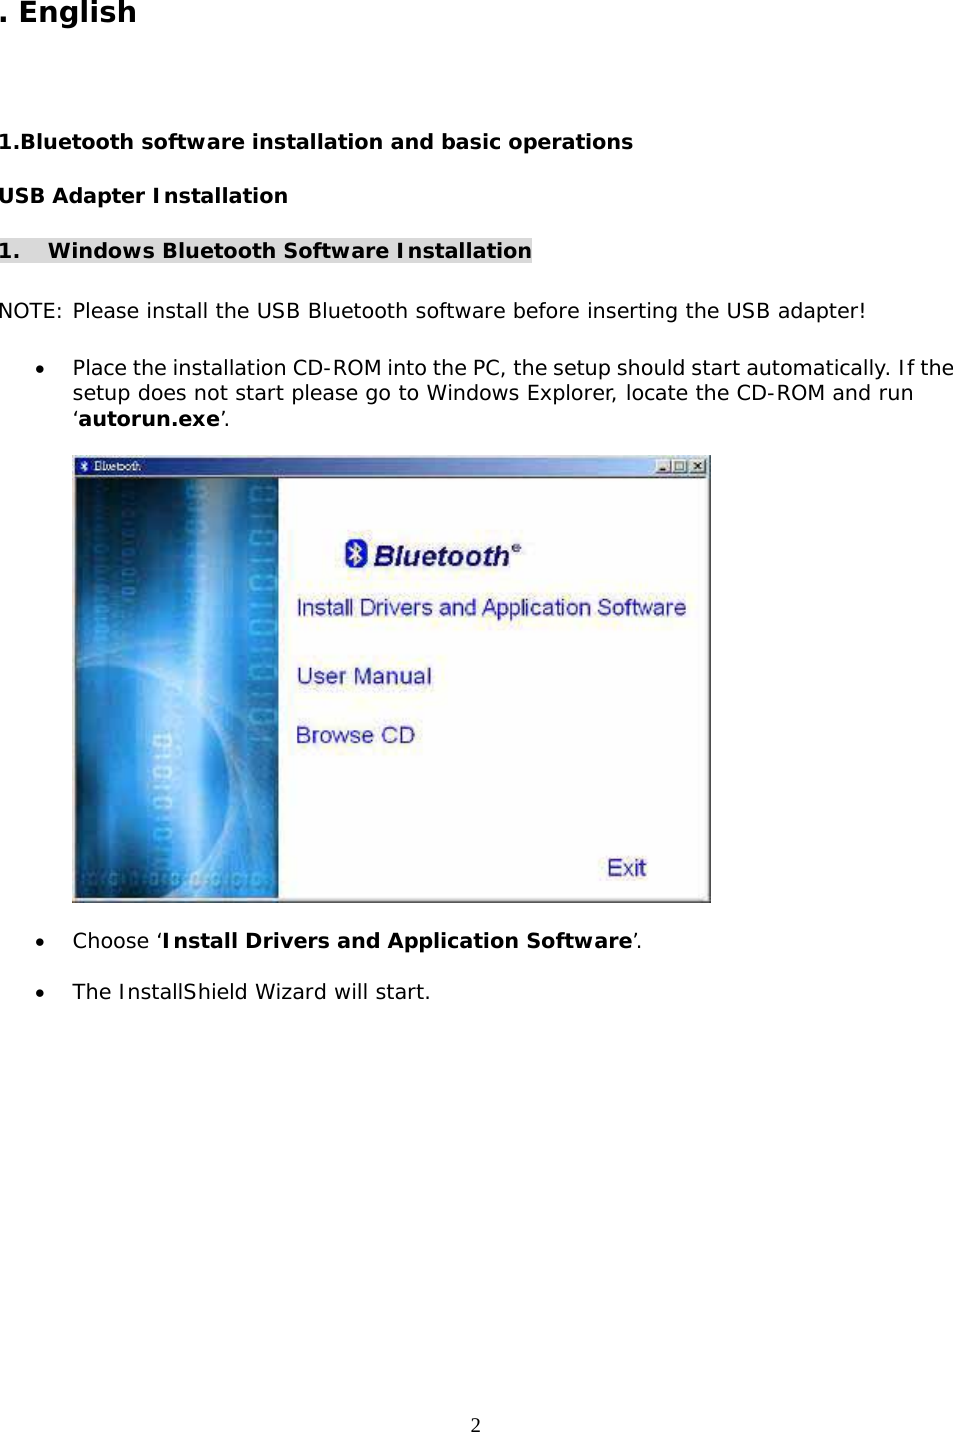 2 . English 1.Bluetooth software installation and basic operations USB Adapter Installation 1.  Windows Bluetooth Software Installation  NOTE: Please install the USB Bluetooth software before inserting the USB adapter!  •  Place the installation CD-ROM into the PC, the setup should start automatically. If the setup does not start please go to Windows Explorer, locate the CD-ROM and run ‘autorun.exe’.    •  Choose ‘Install Drivers and Application Software’.  •  The InstallShield Wizard will start. 